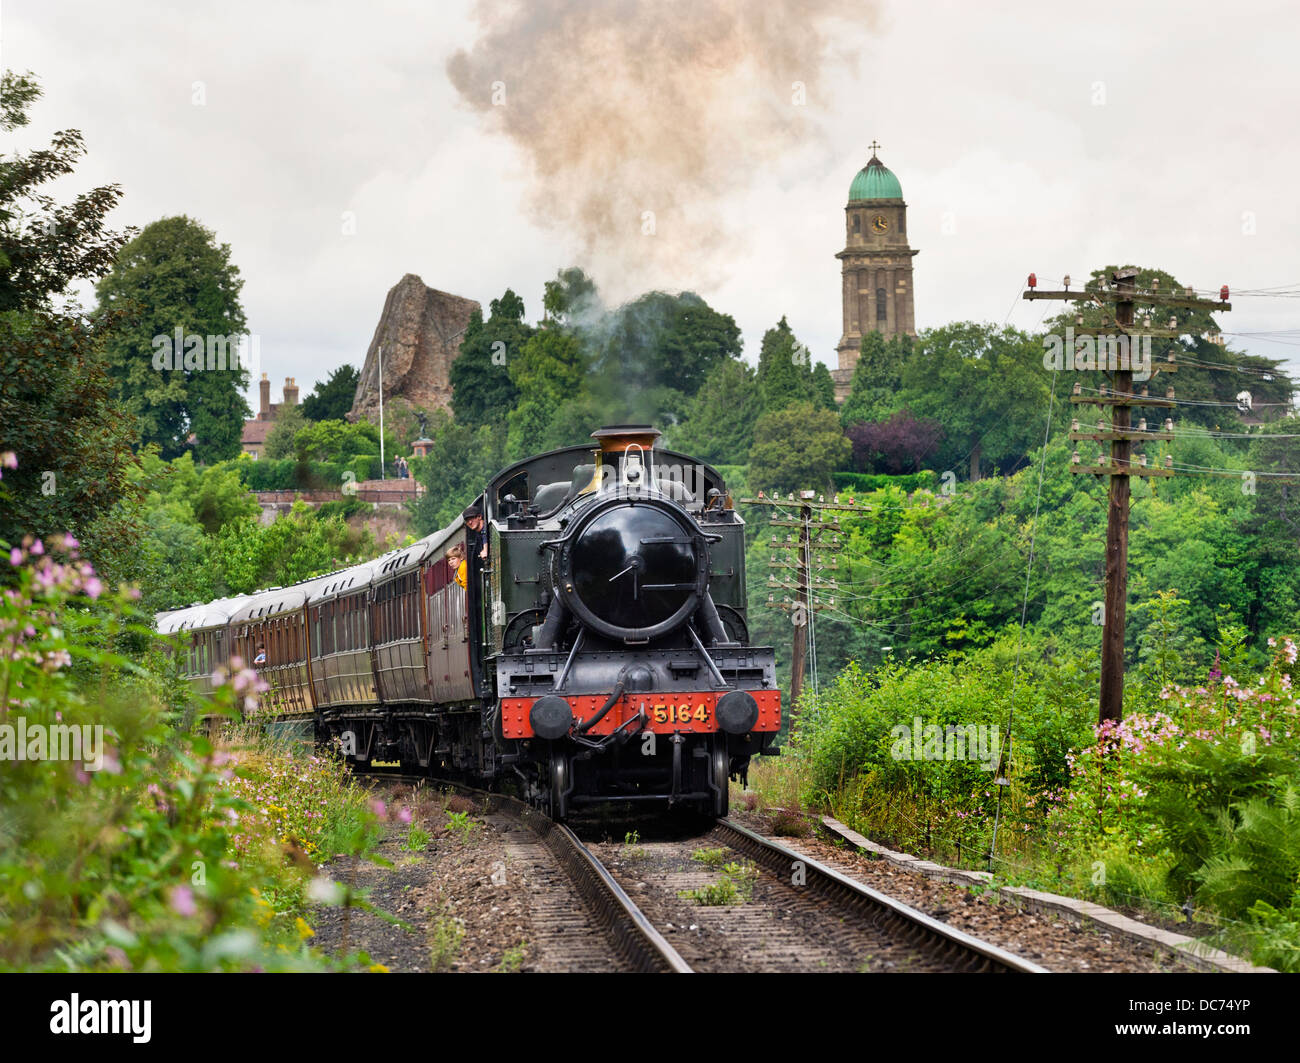 A steam train leaves the town of Bridgnorth bound for Kidderminster, Severn Valley Railway, Shropshire UK Stock Photo